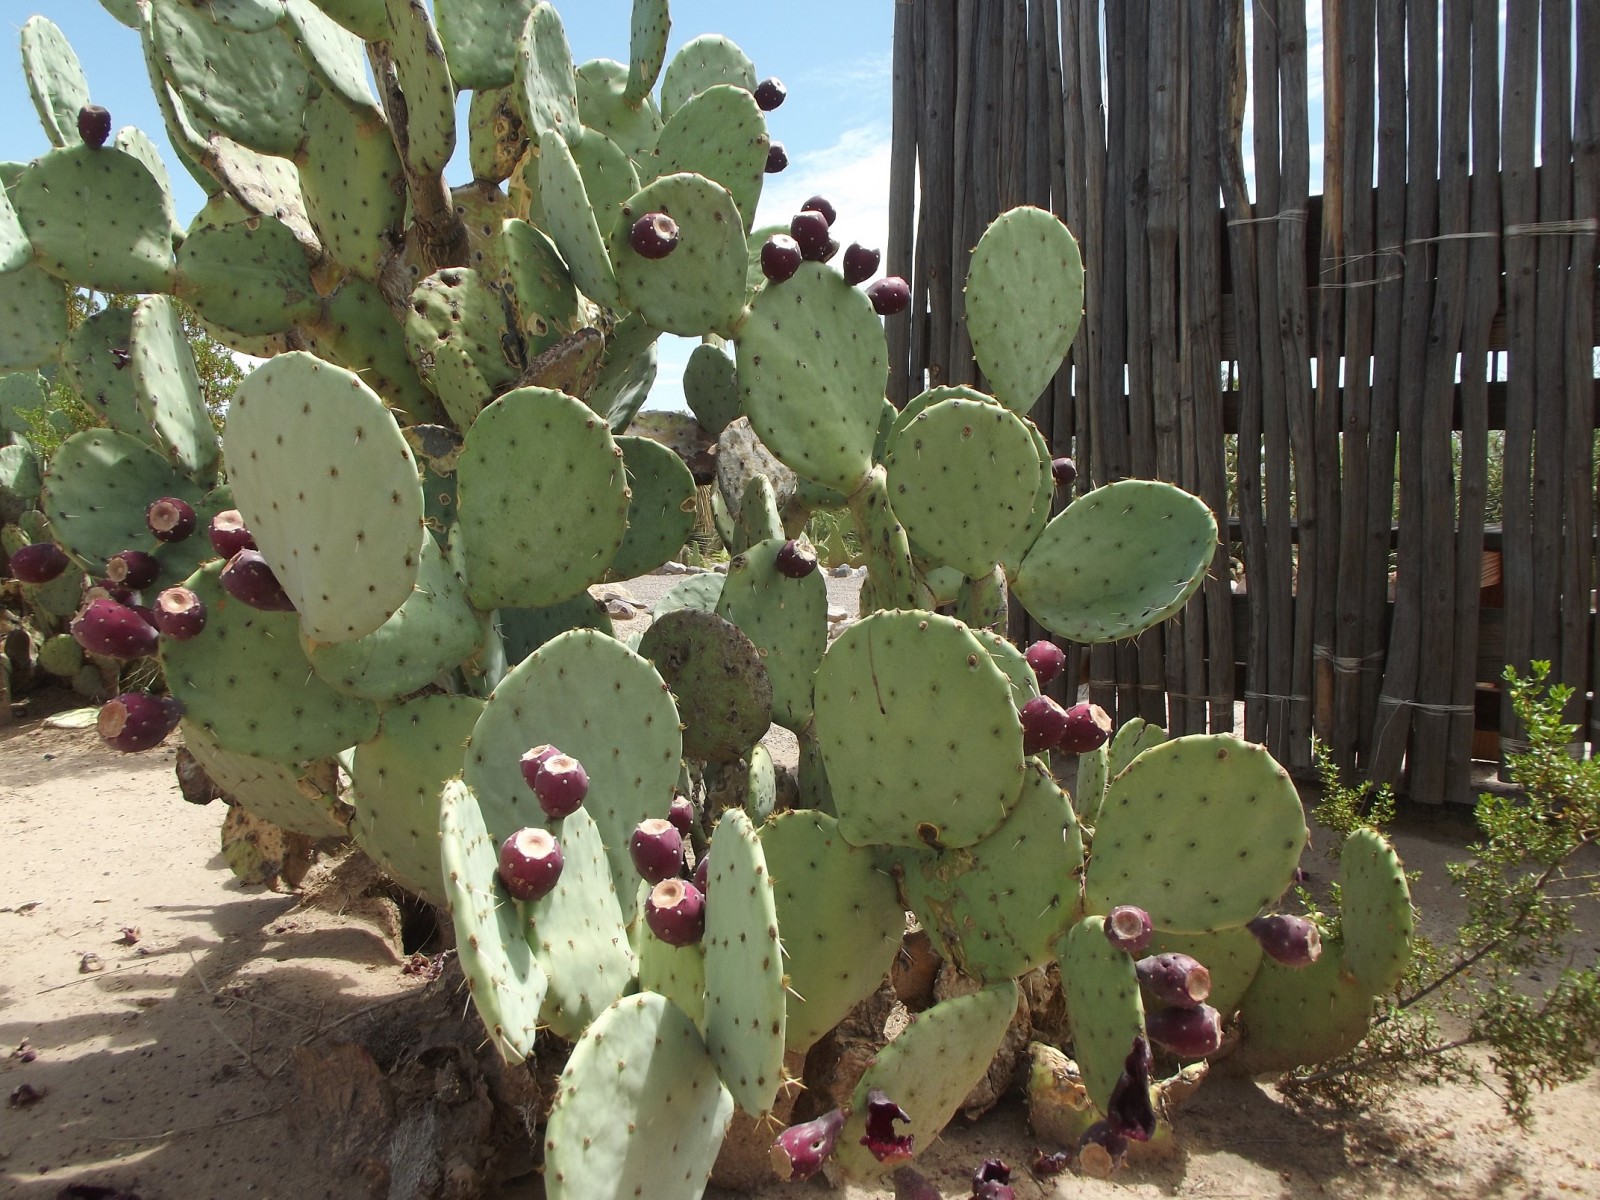 A prickly pear plant at Fort Selden.